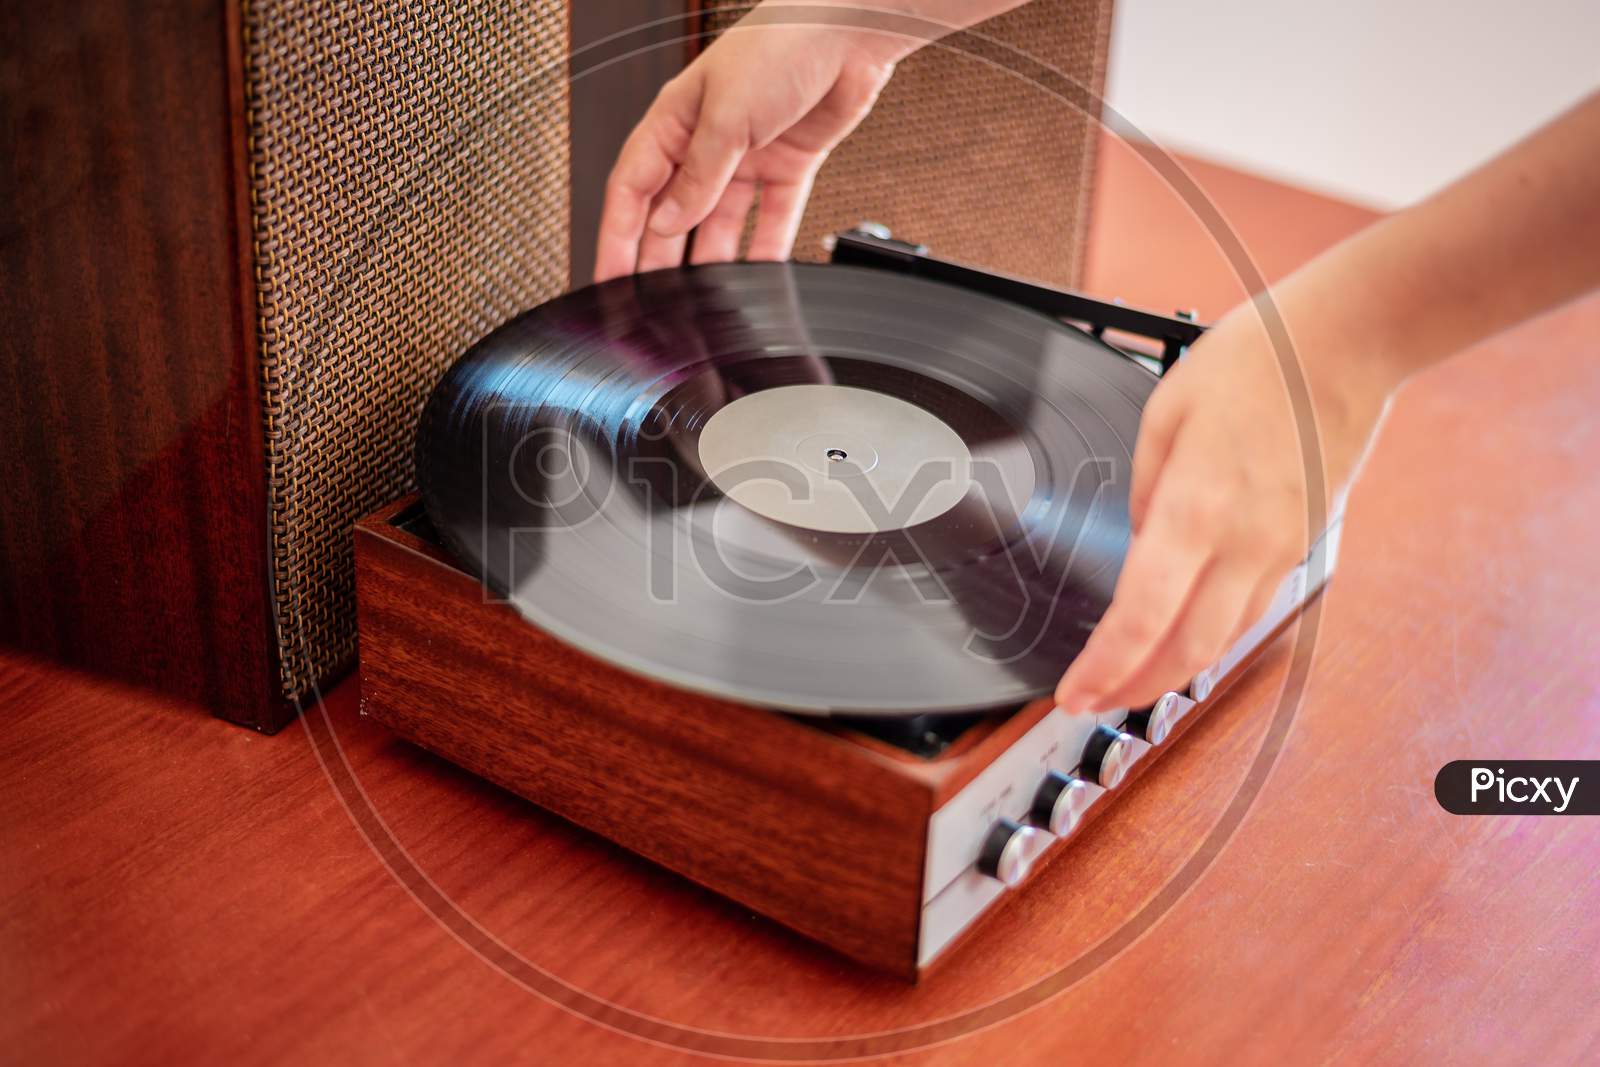 Hands put a vinyl on an old wooden turntable